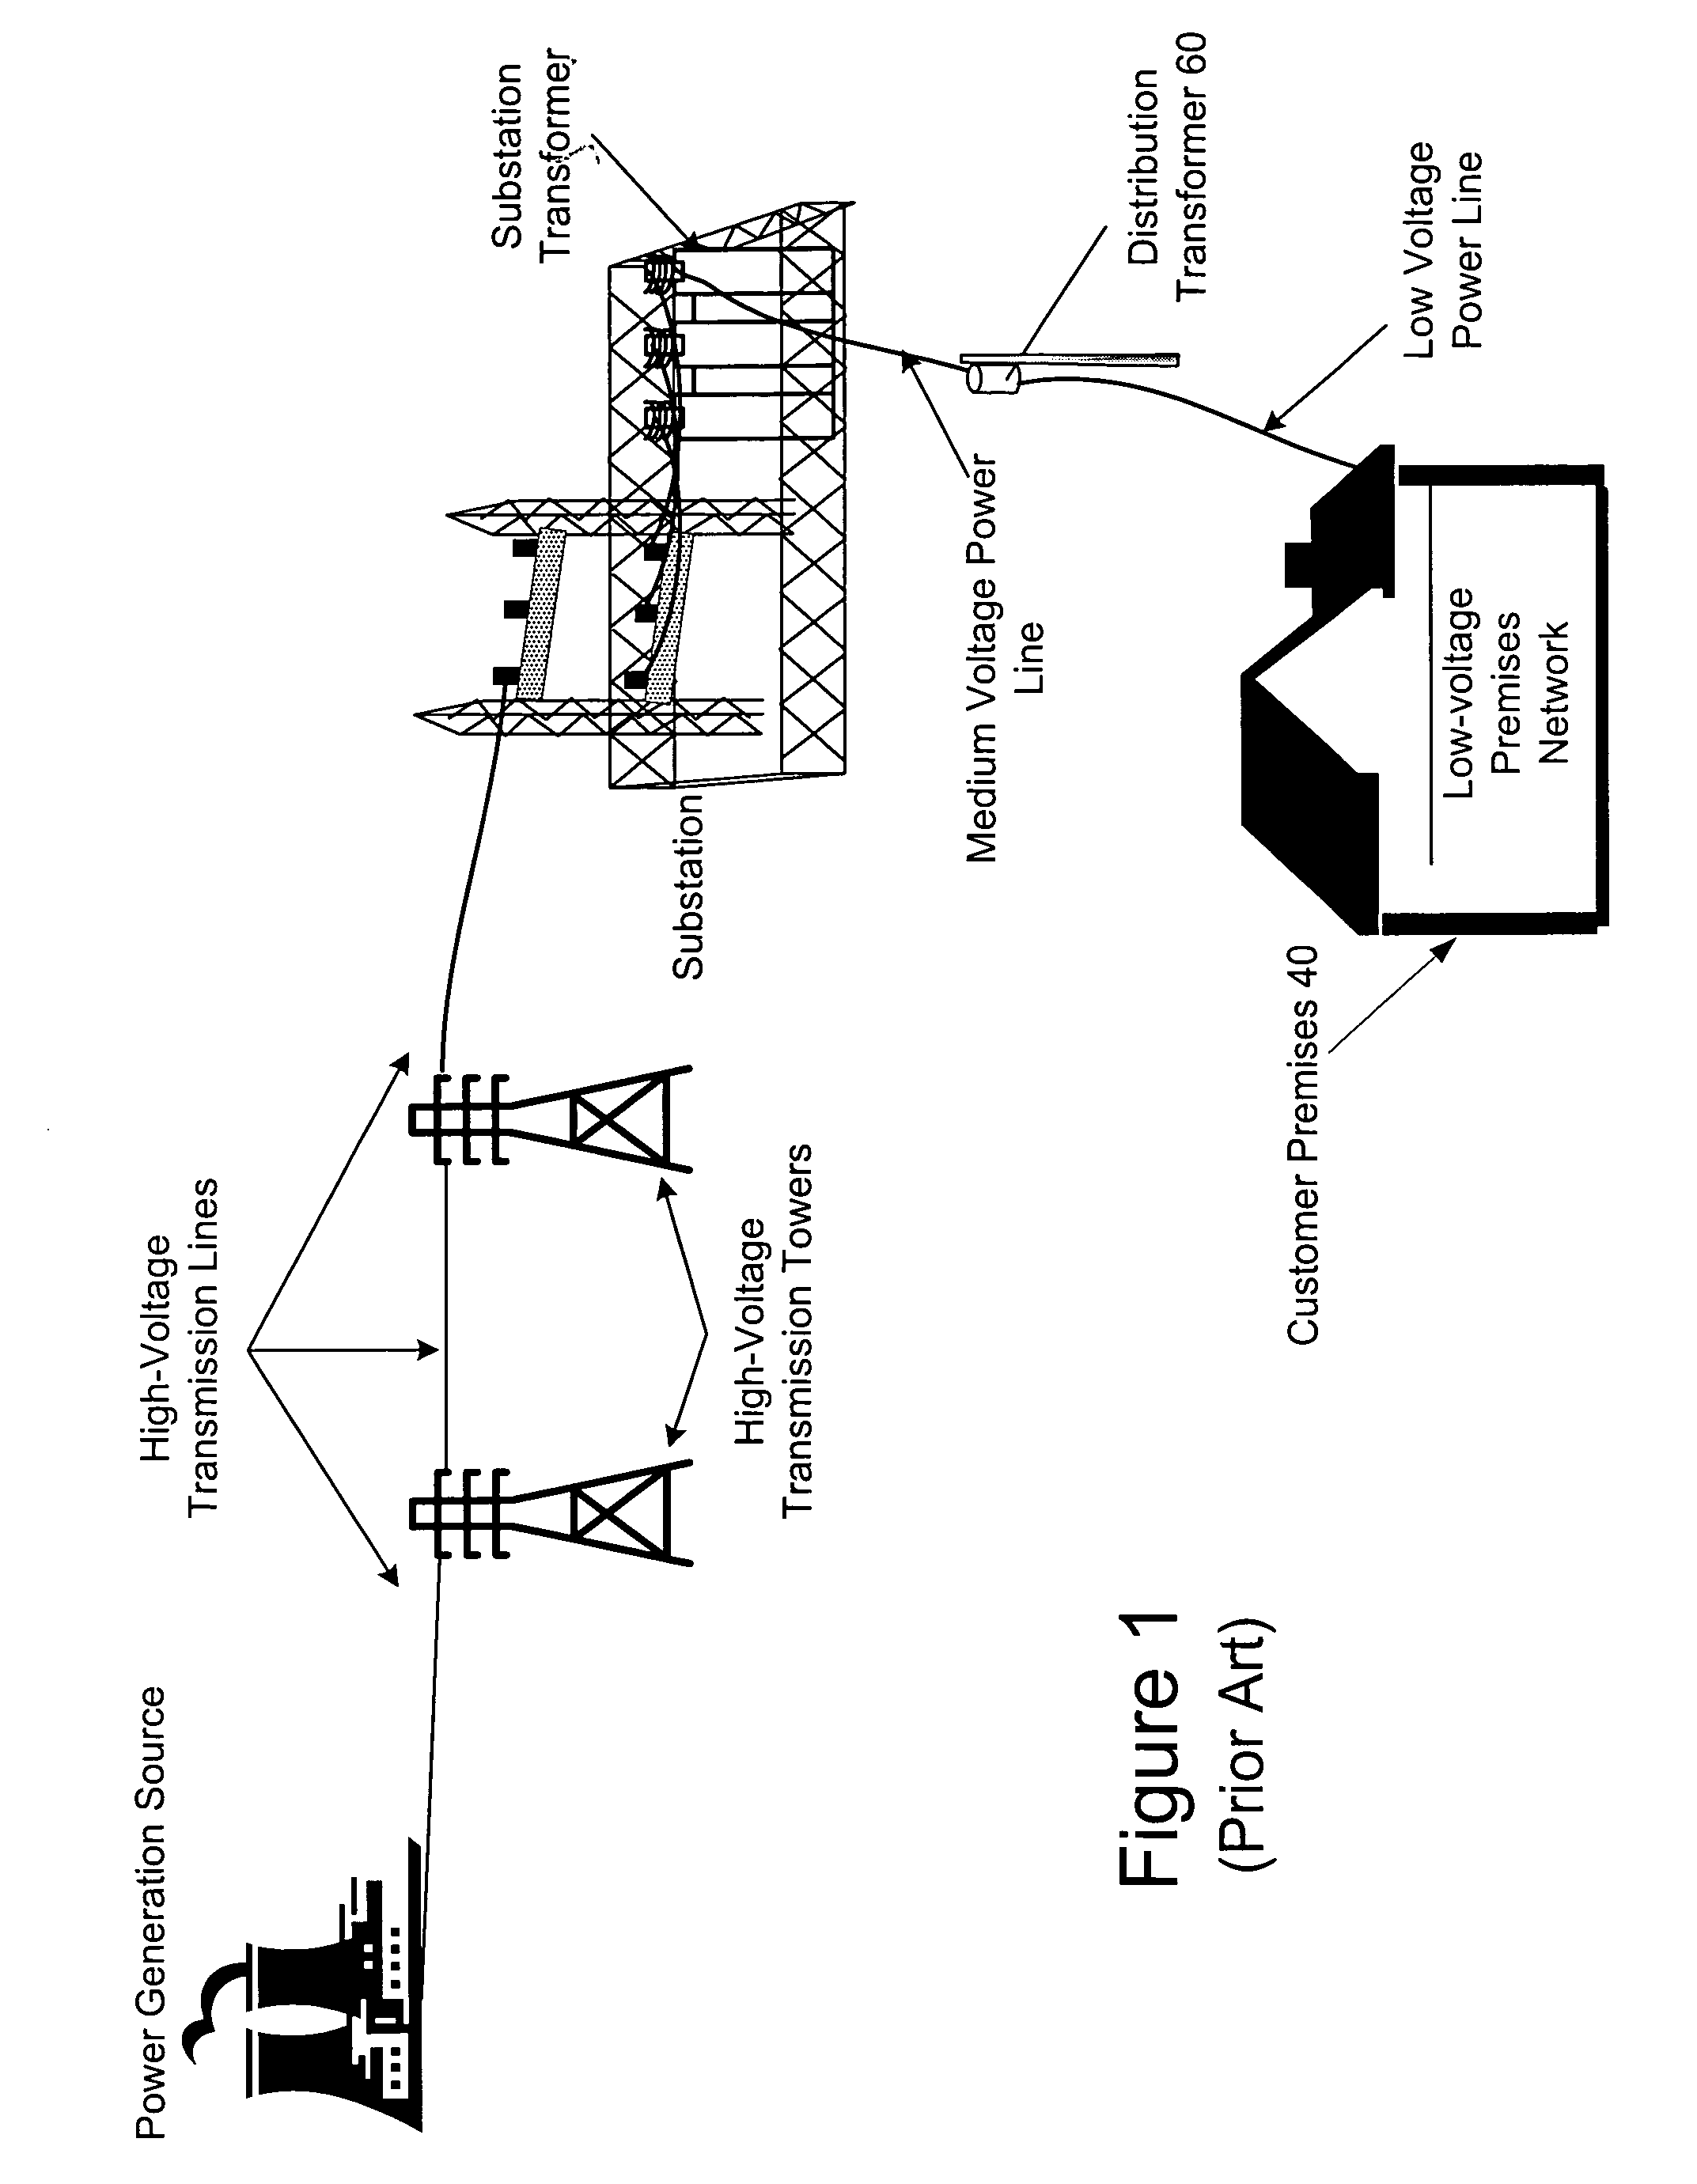 Power line communication system and method of operating the same